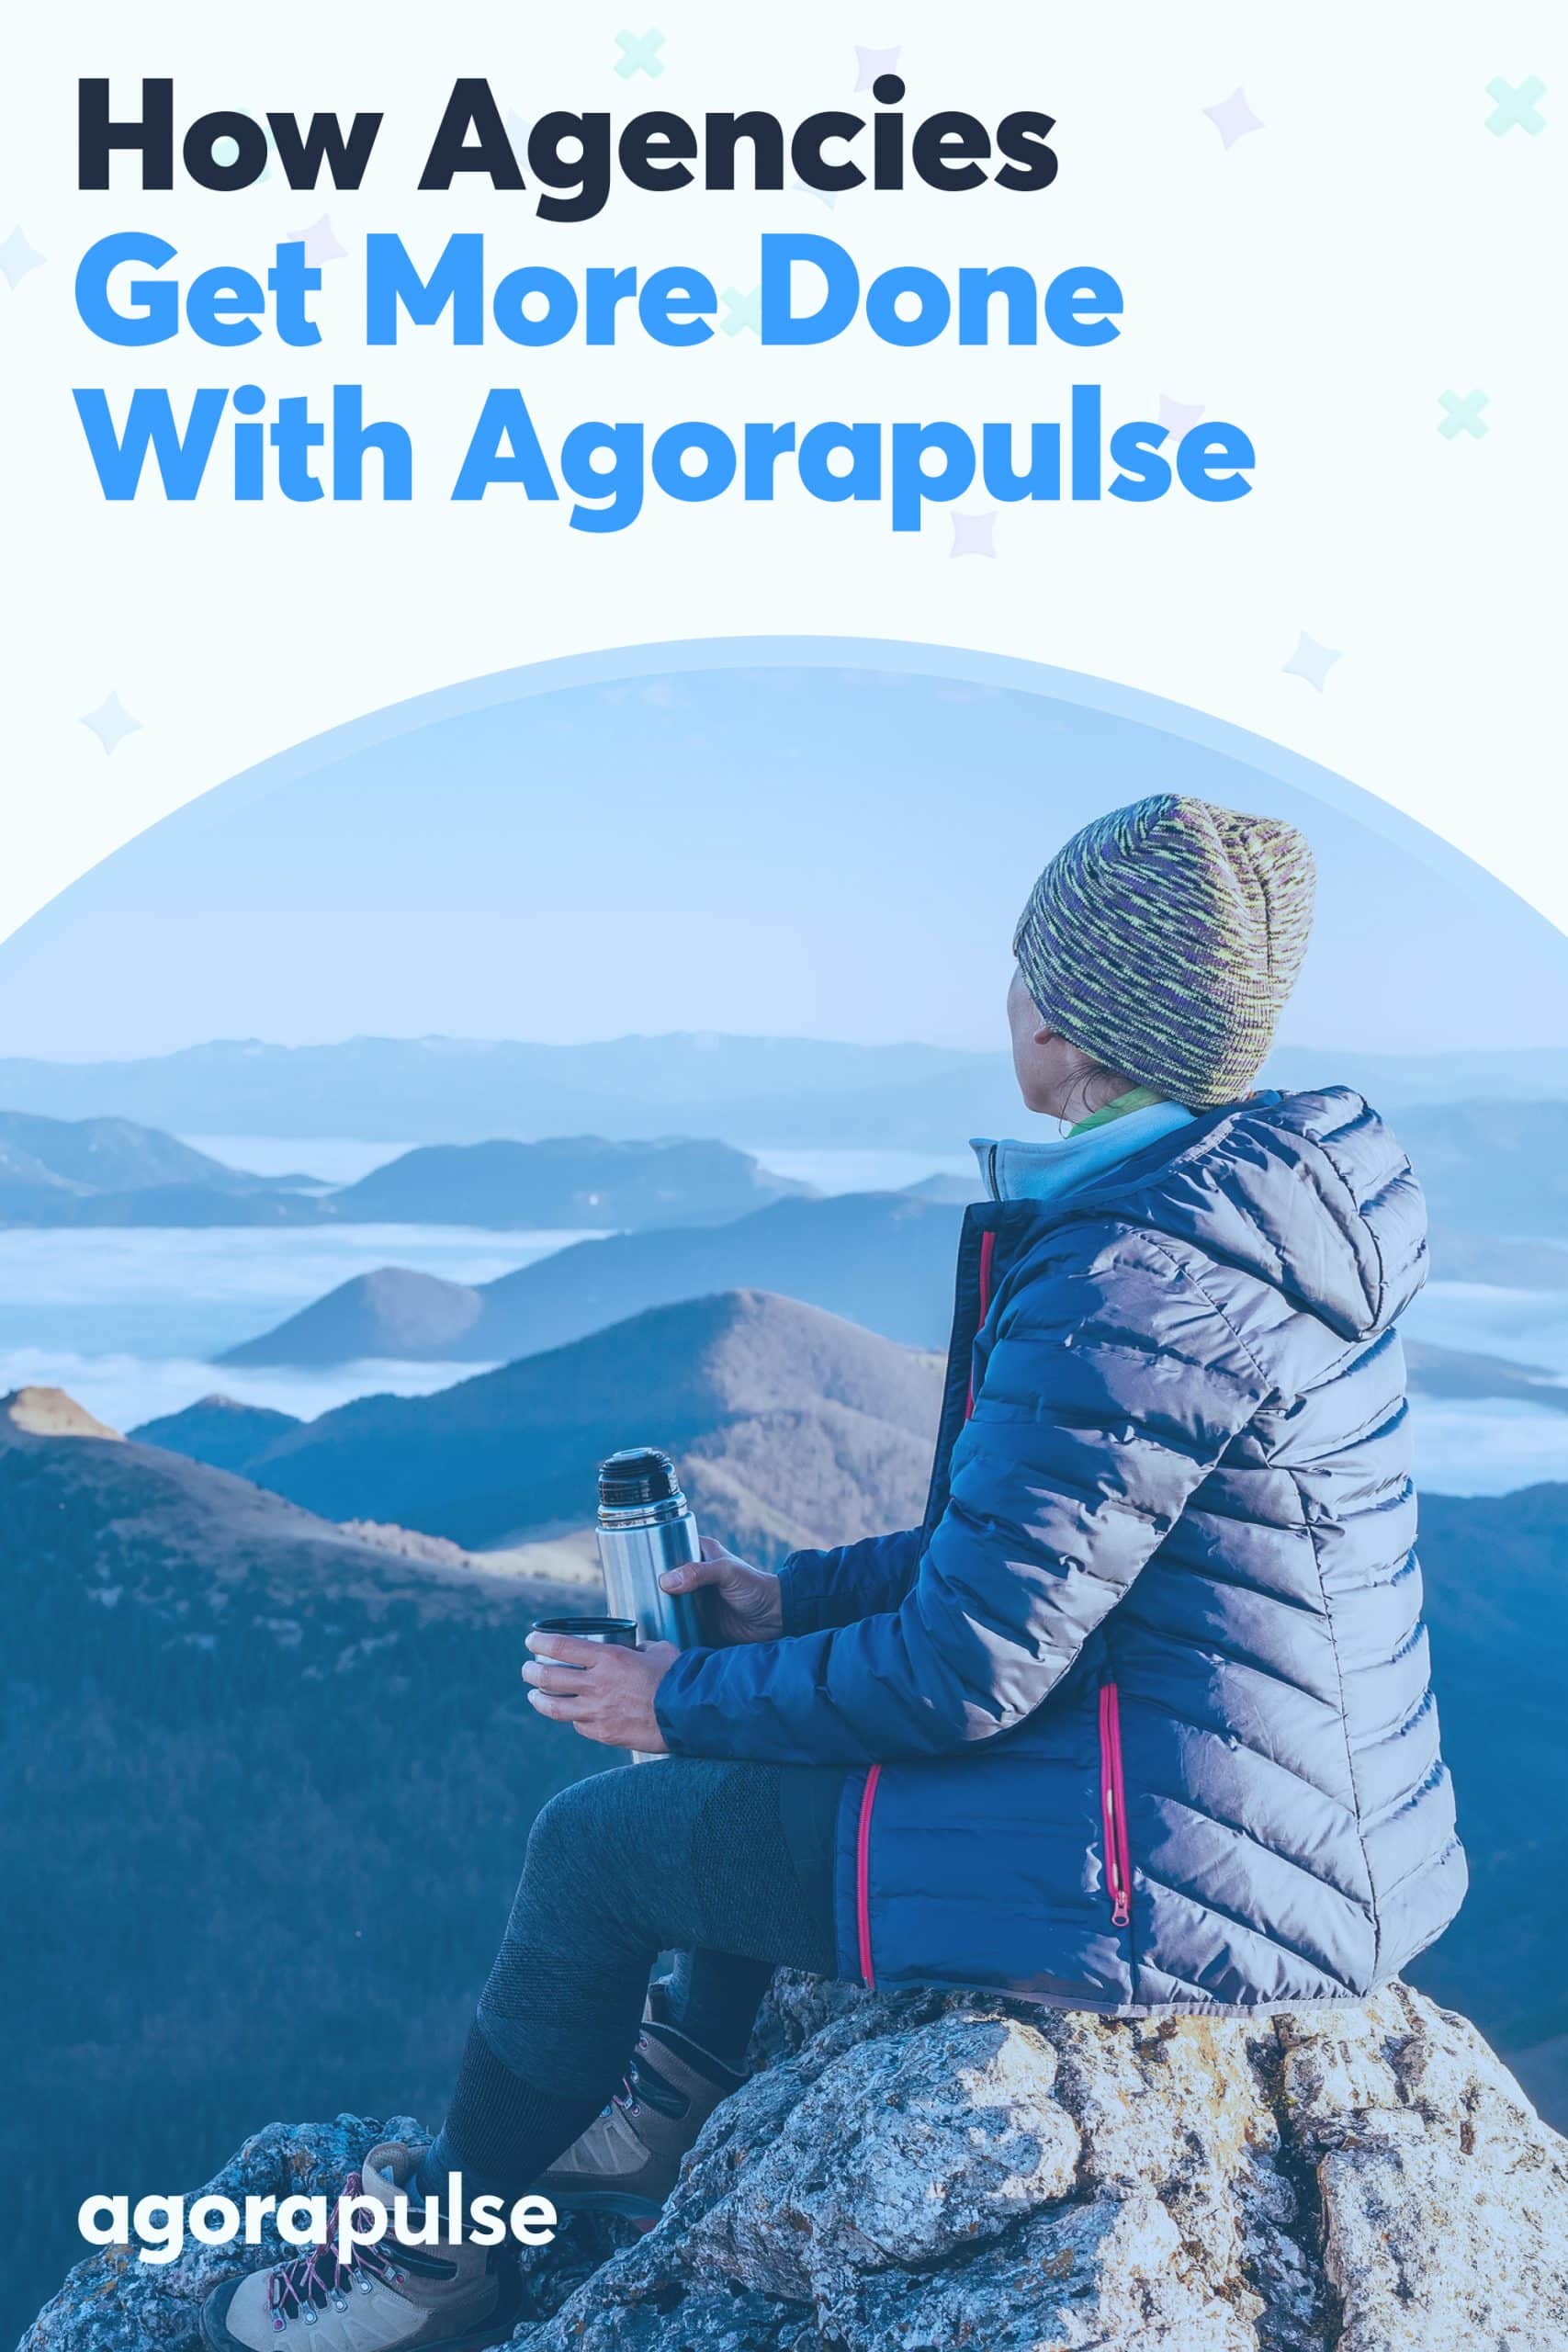 How Fluid Ideas Reached Further and Did More With Agorapulse